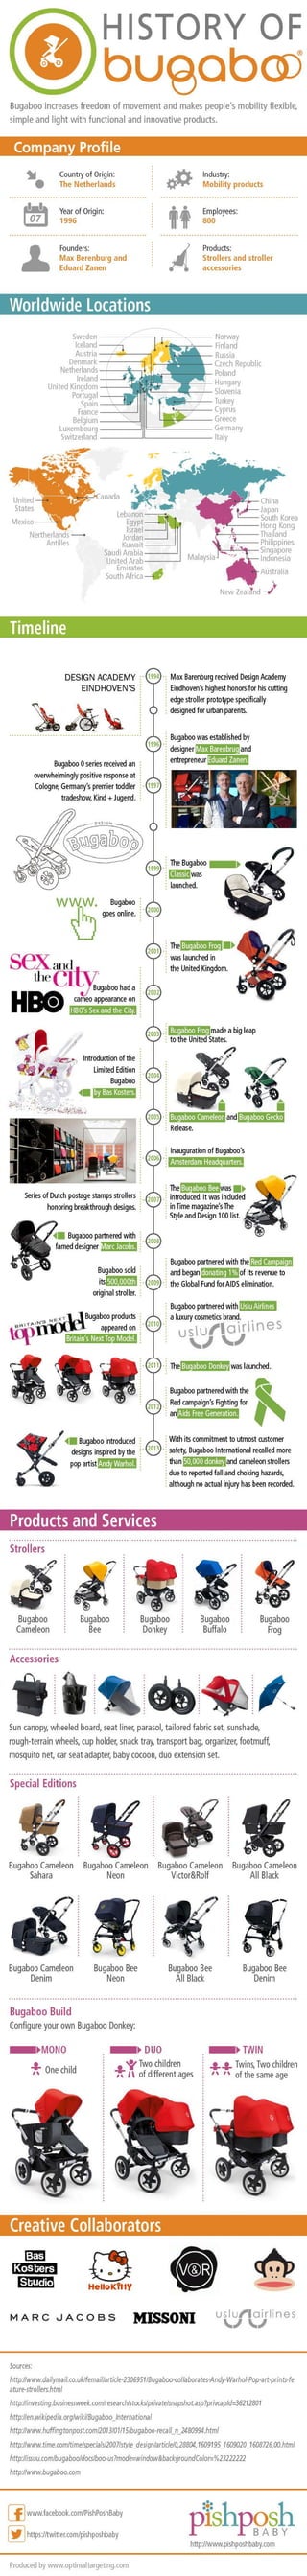 History and Facts about The Bugaboo